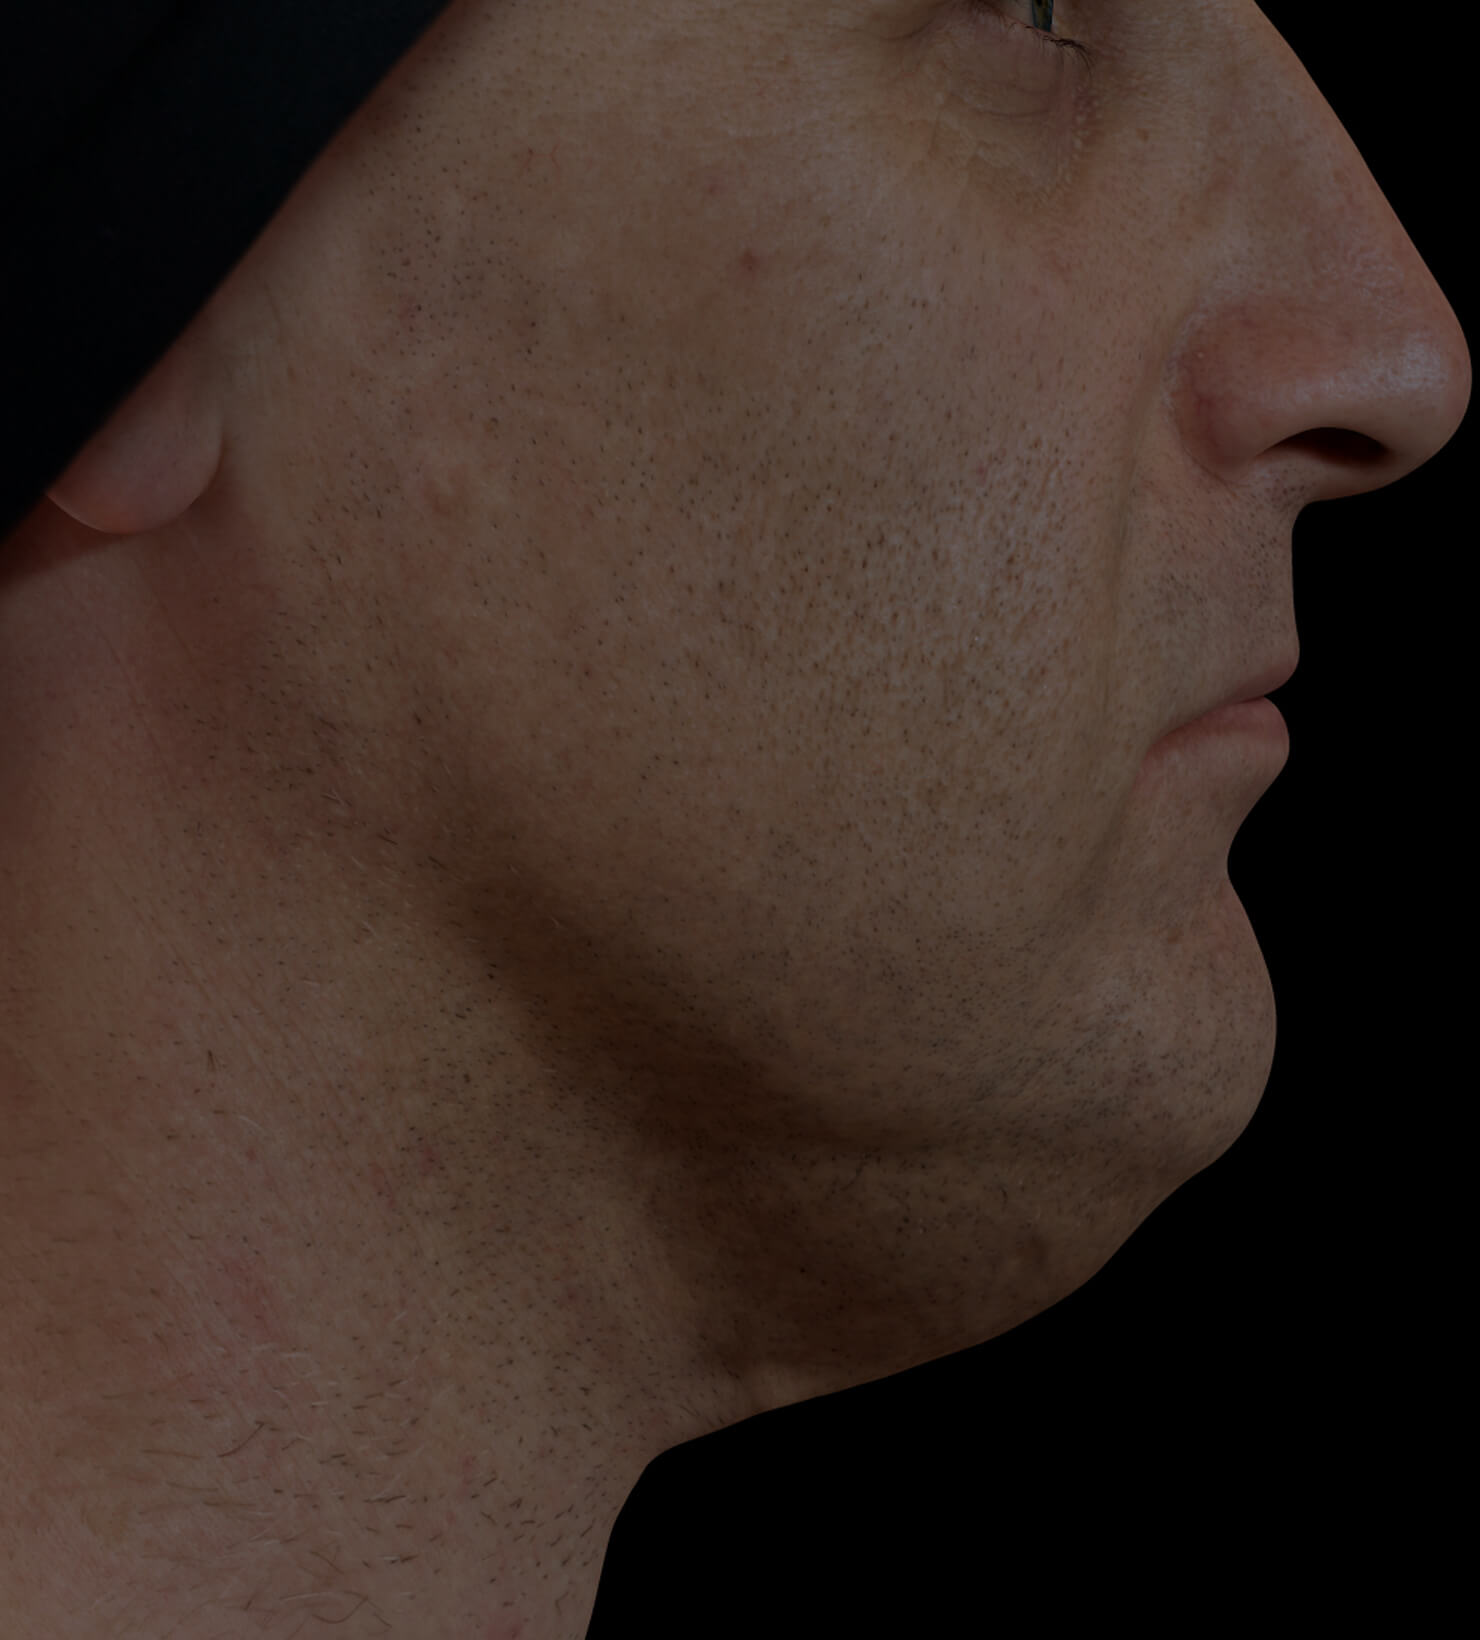 Clinique Chloé male patient with volume under the chin, or double chin, treated with Belkyra injections